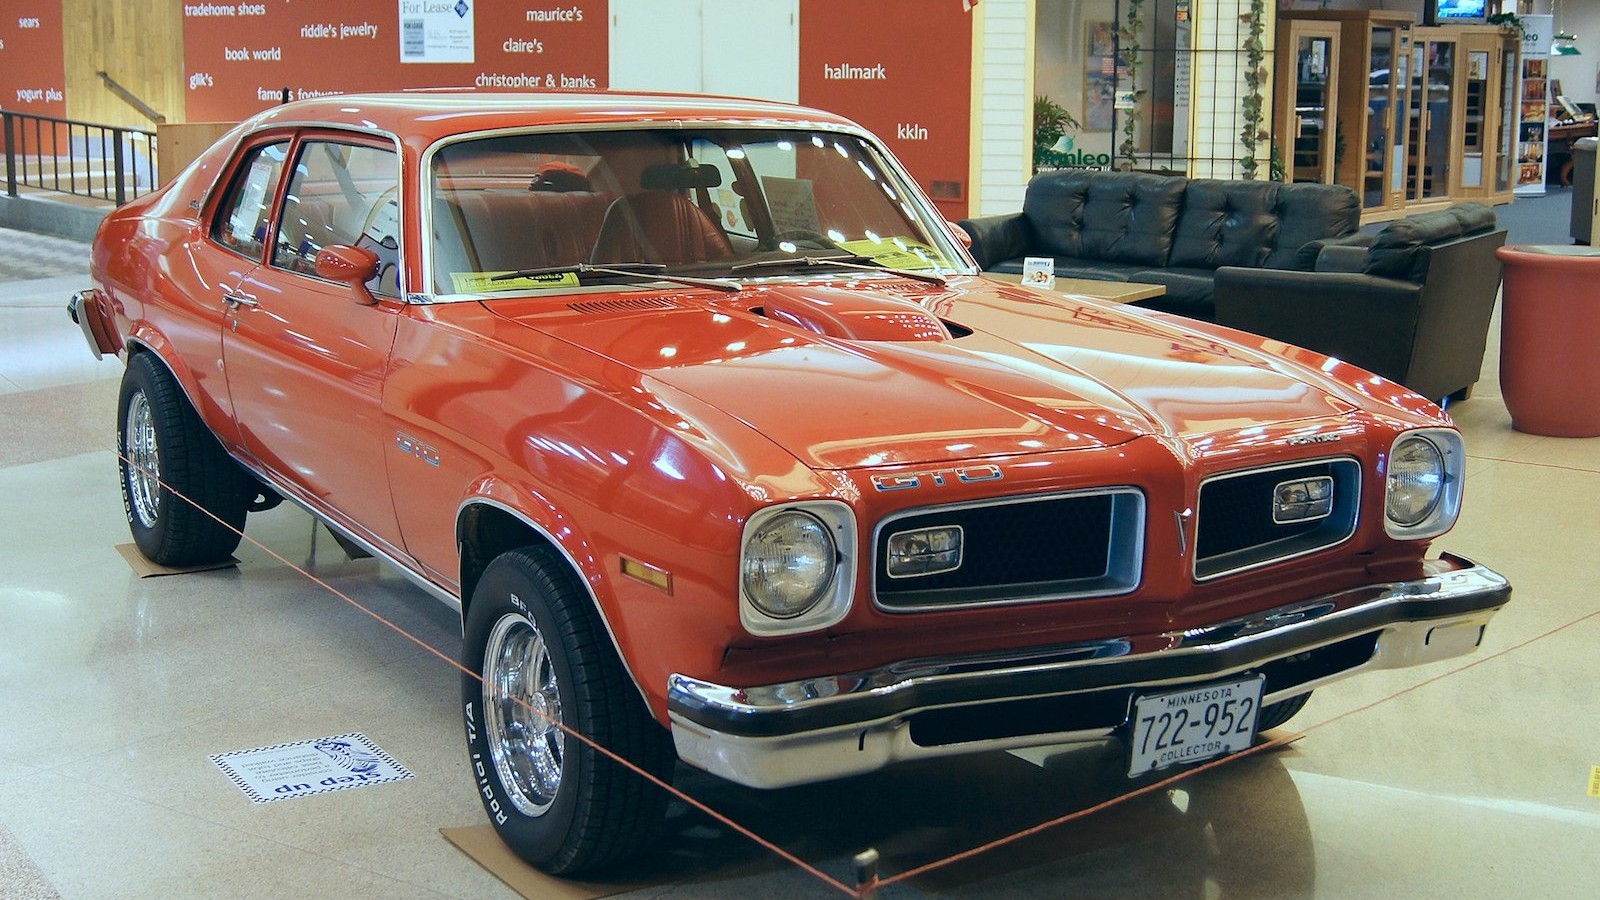 16 glorious ’70s muscle cars Classic & Sports Car